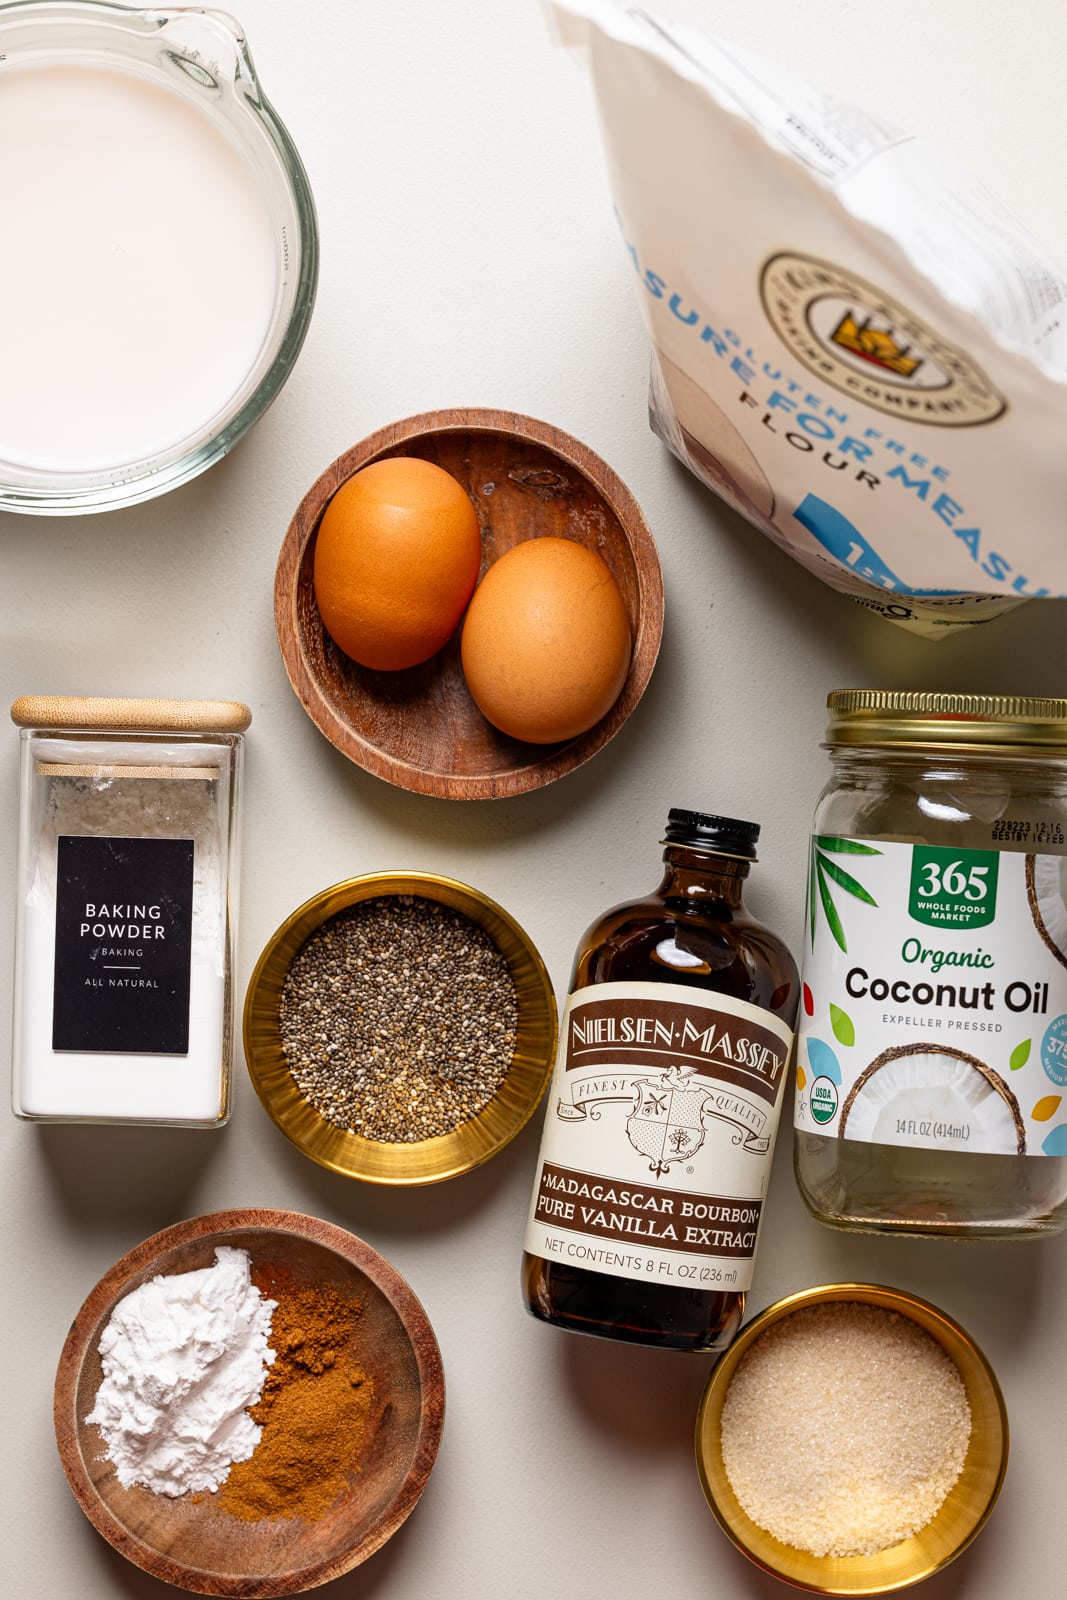 Ingredients on a grey table including gluten-free flour, eggs, vanilla, coconut oil, chia seeds, and spices.